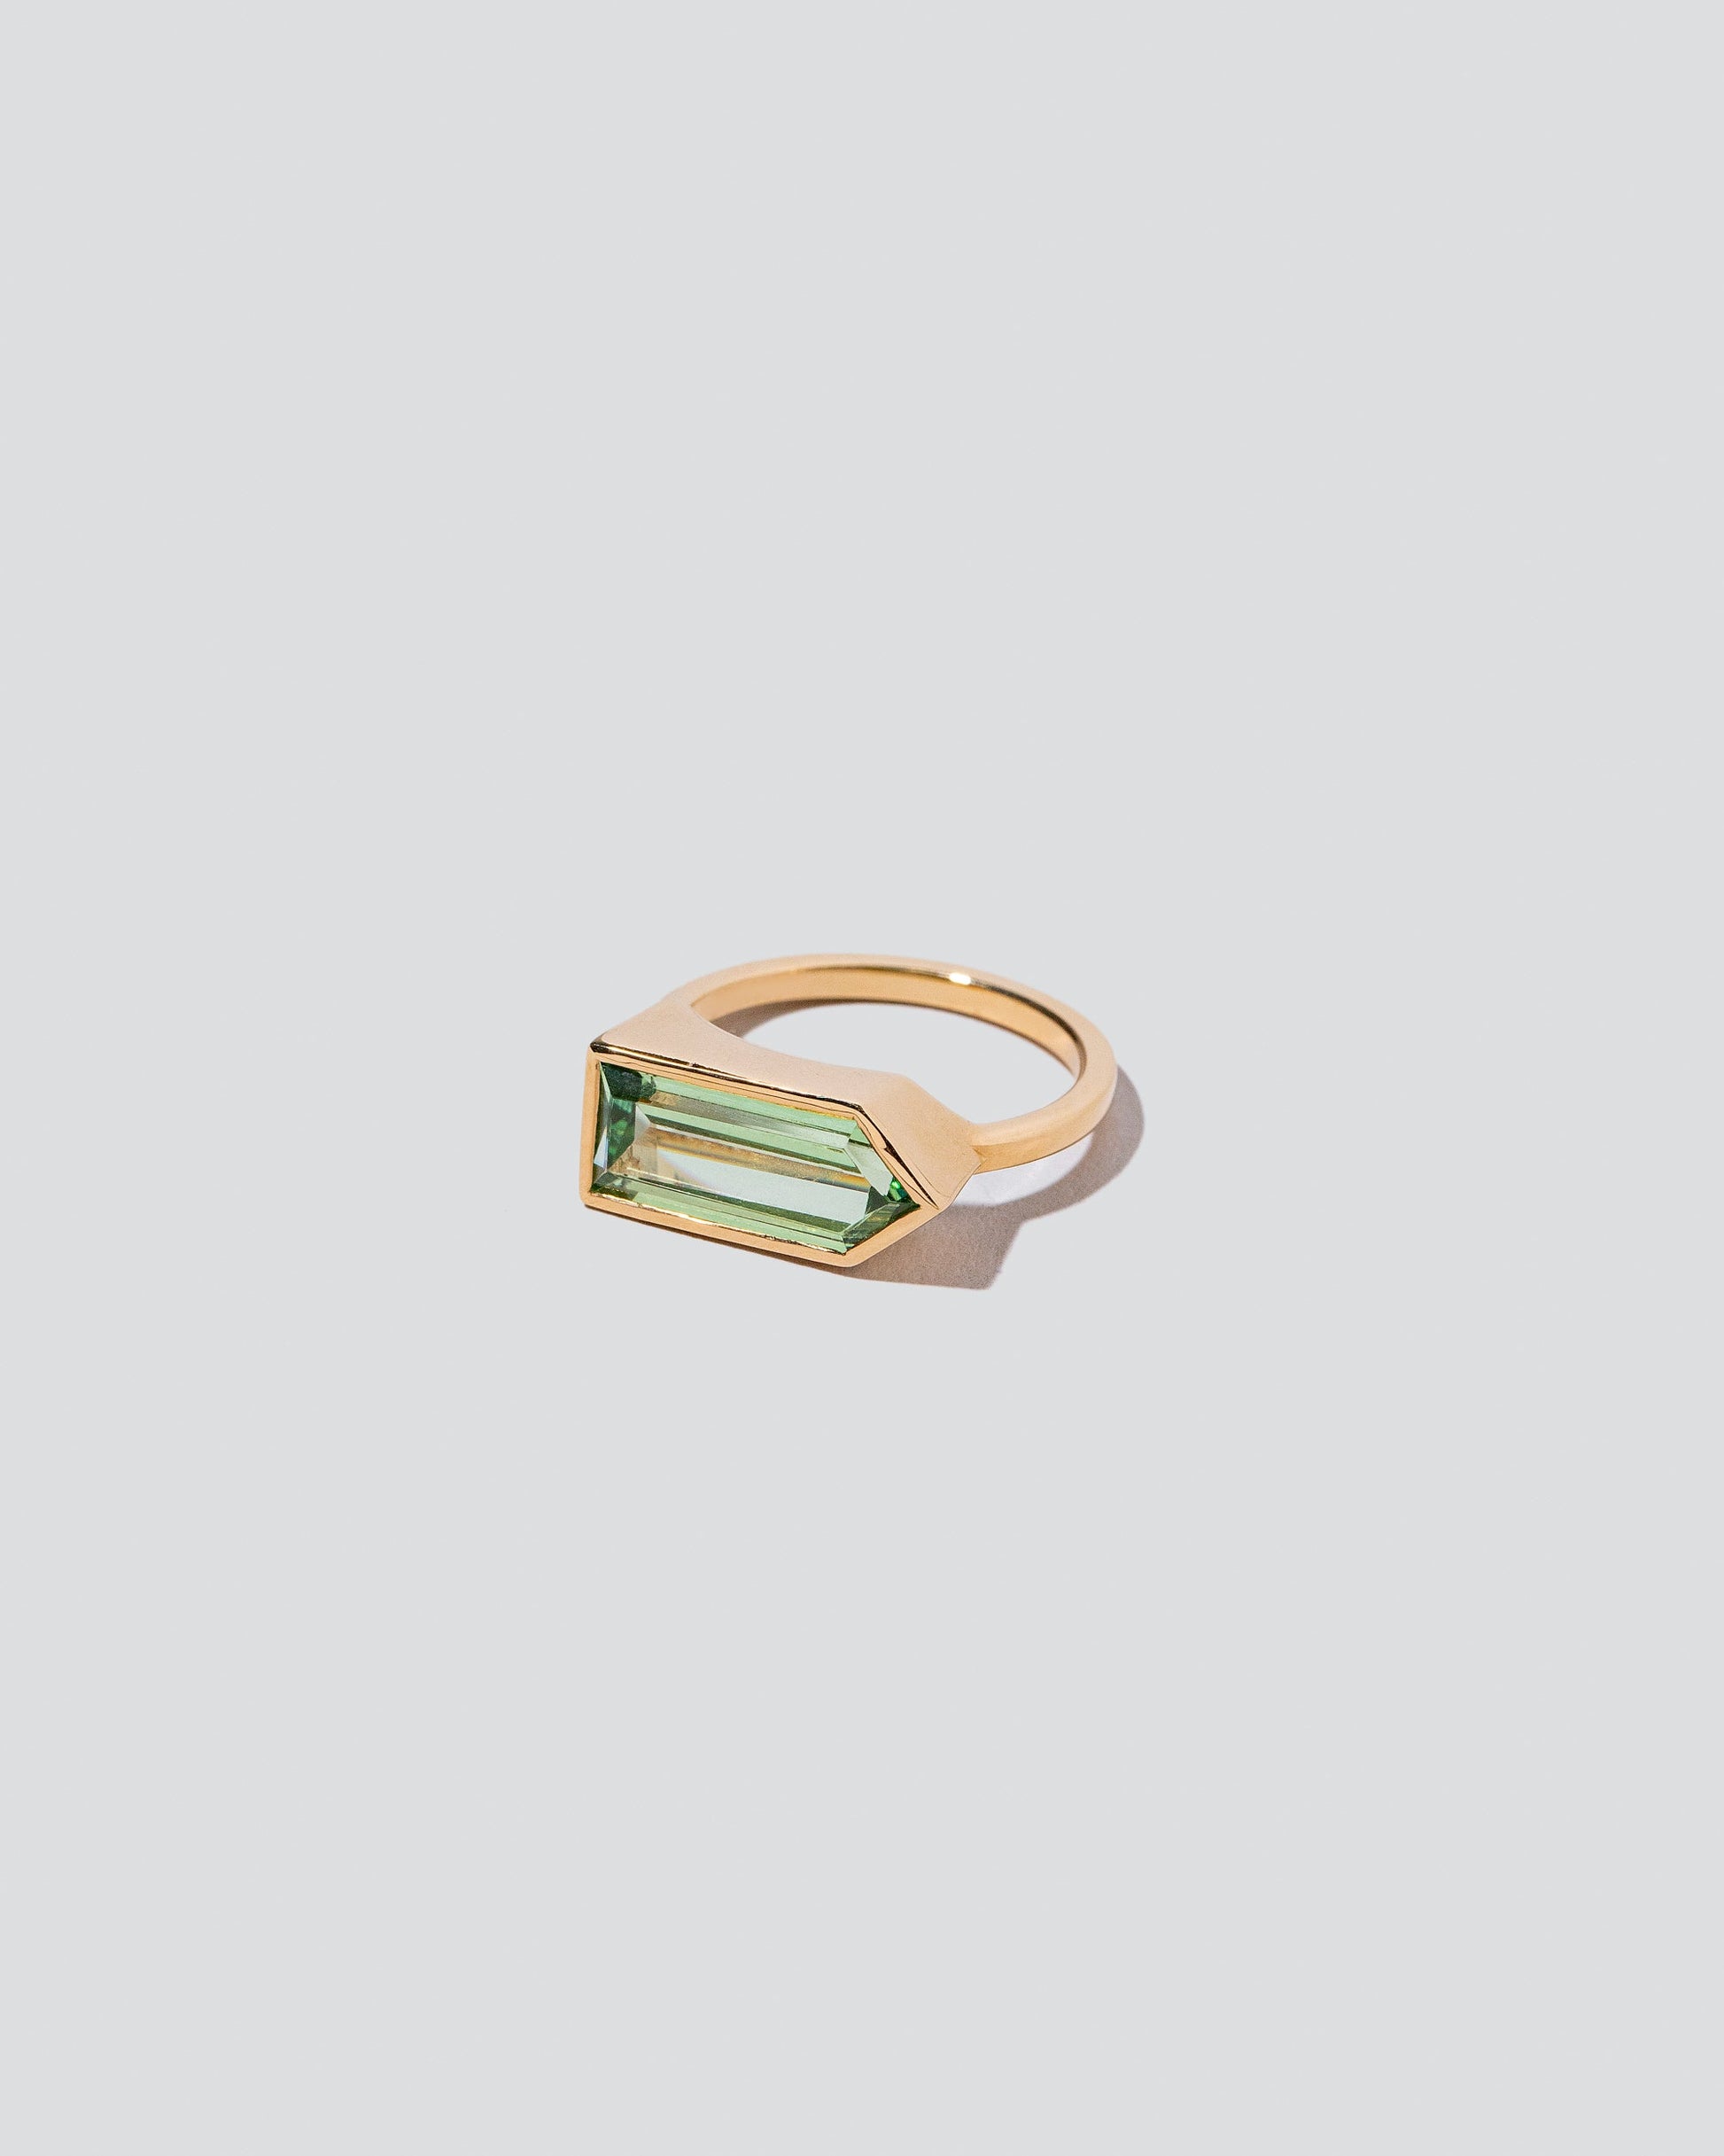 Product photo of Moray Ring on a light color background 